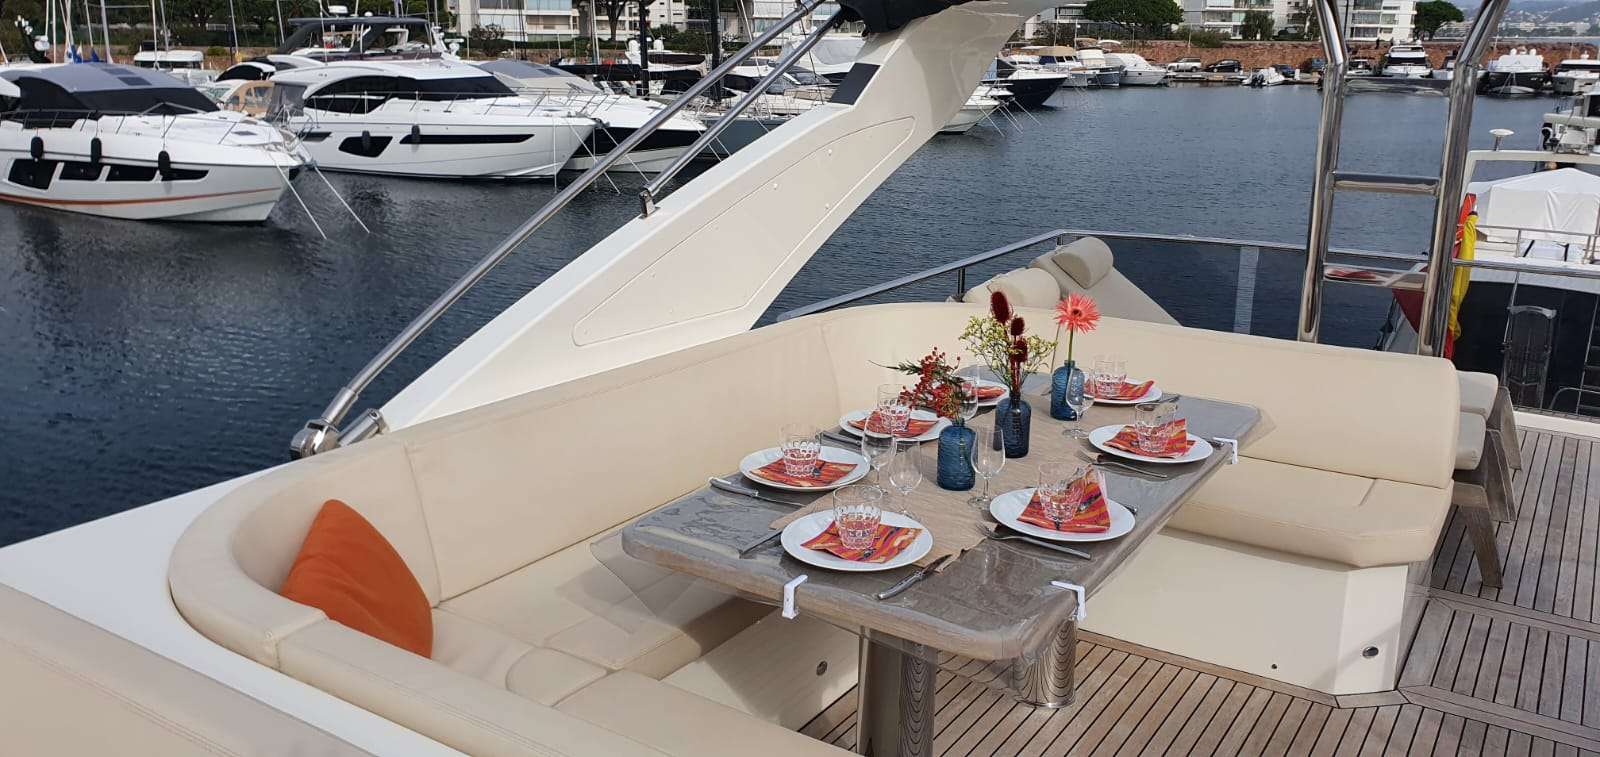 ABSOLUTE - Yacht Charter Cogolin & Boat hire in Fr. Riviera, Corsica & Sardinia 3